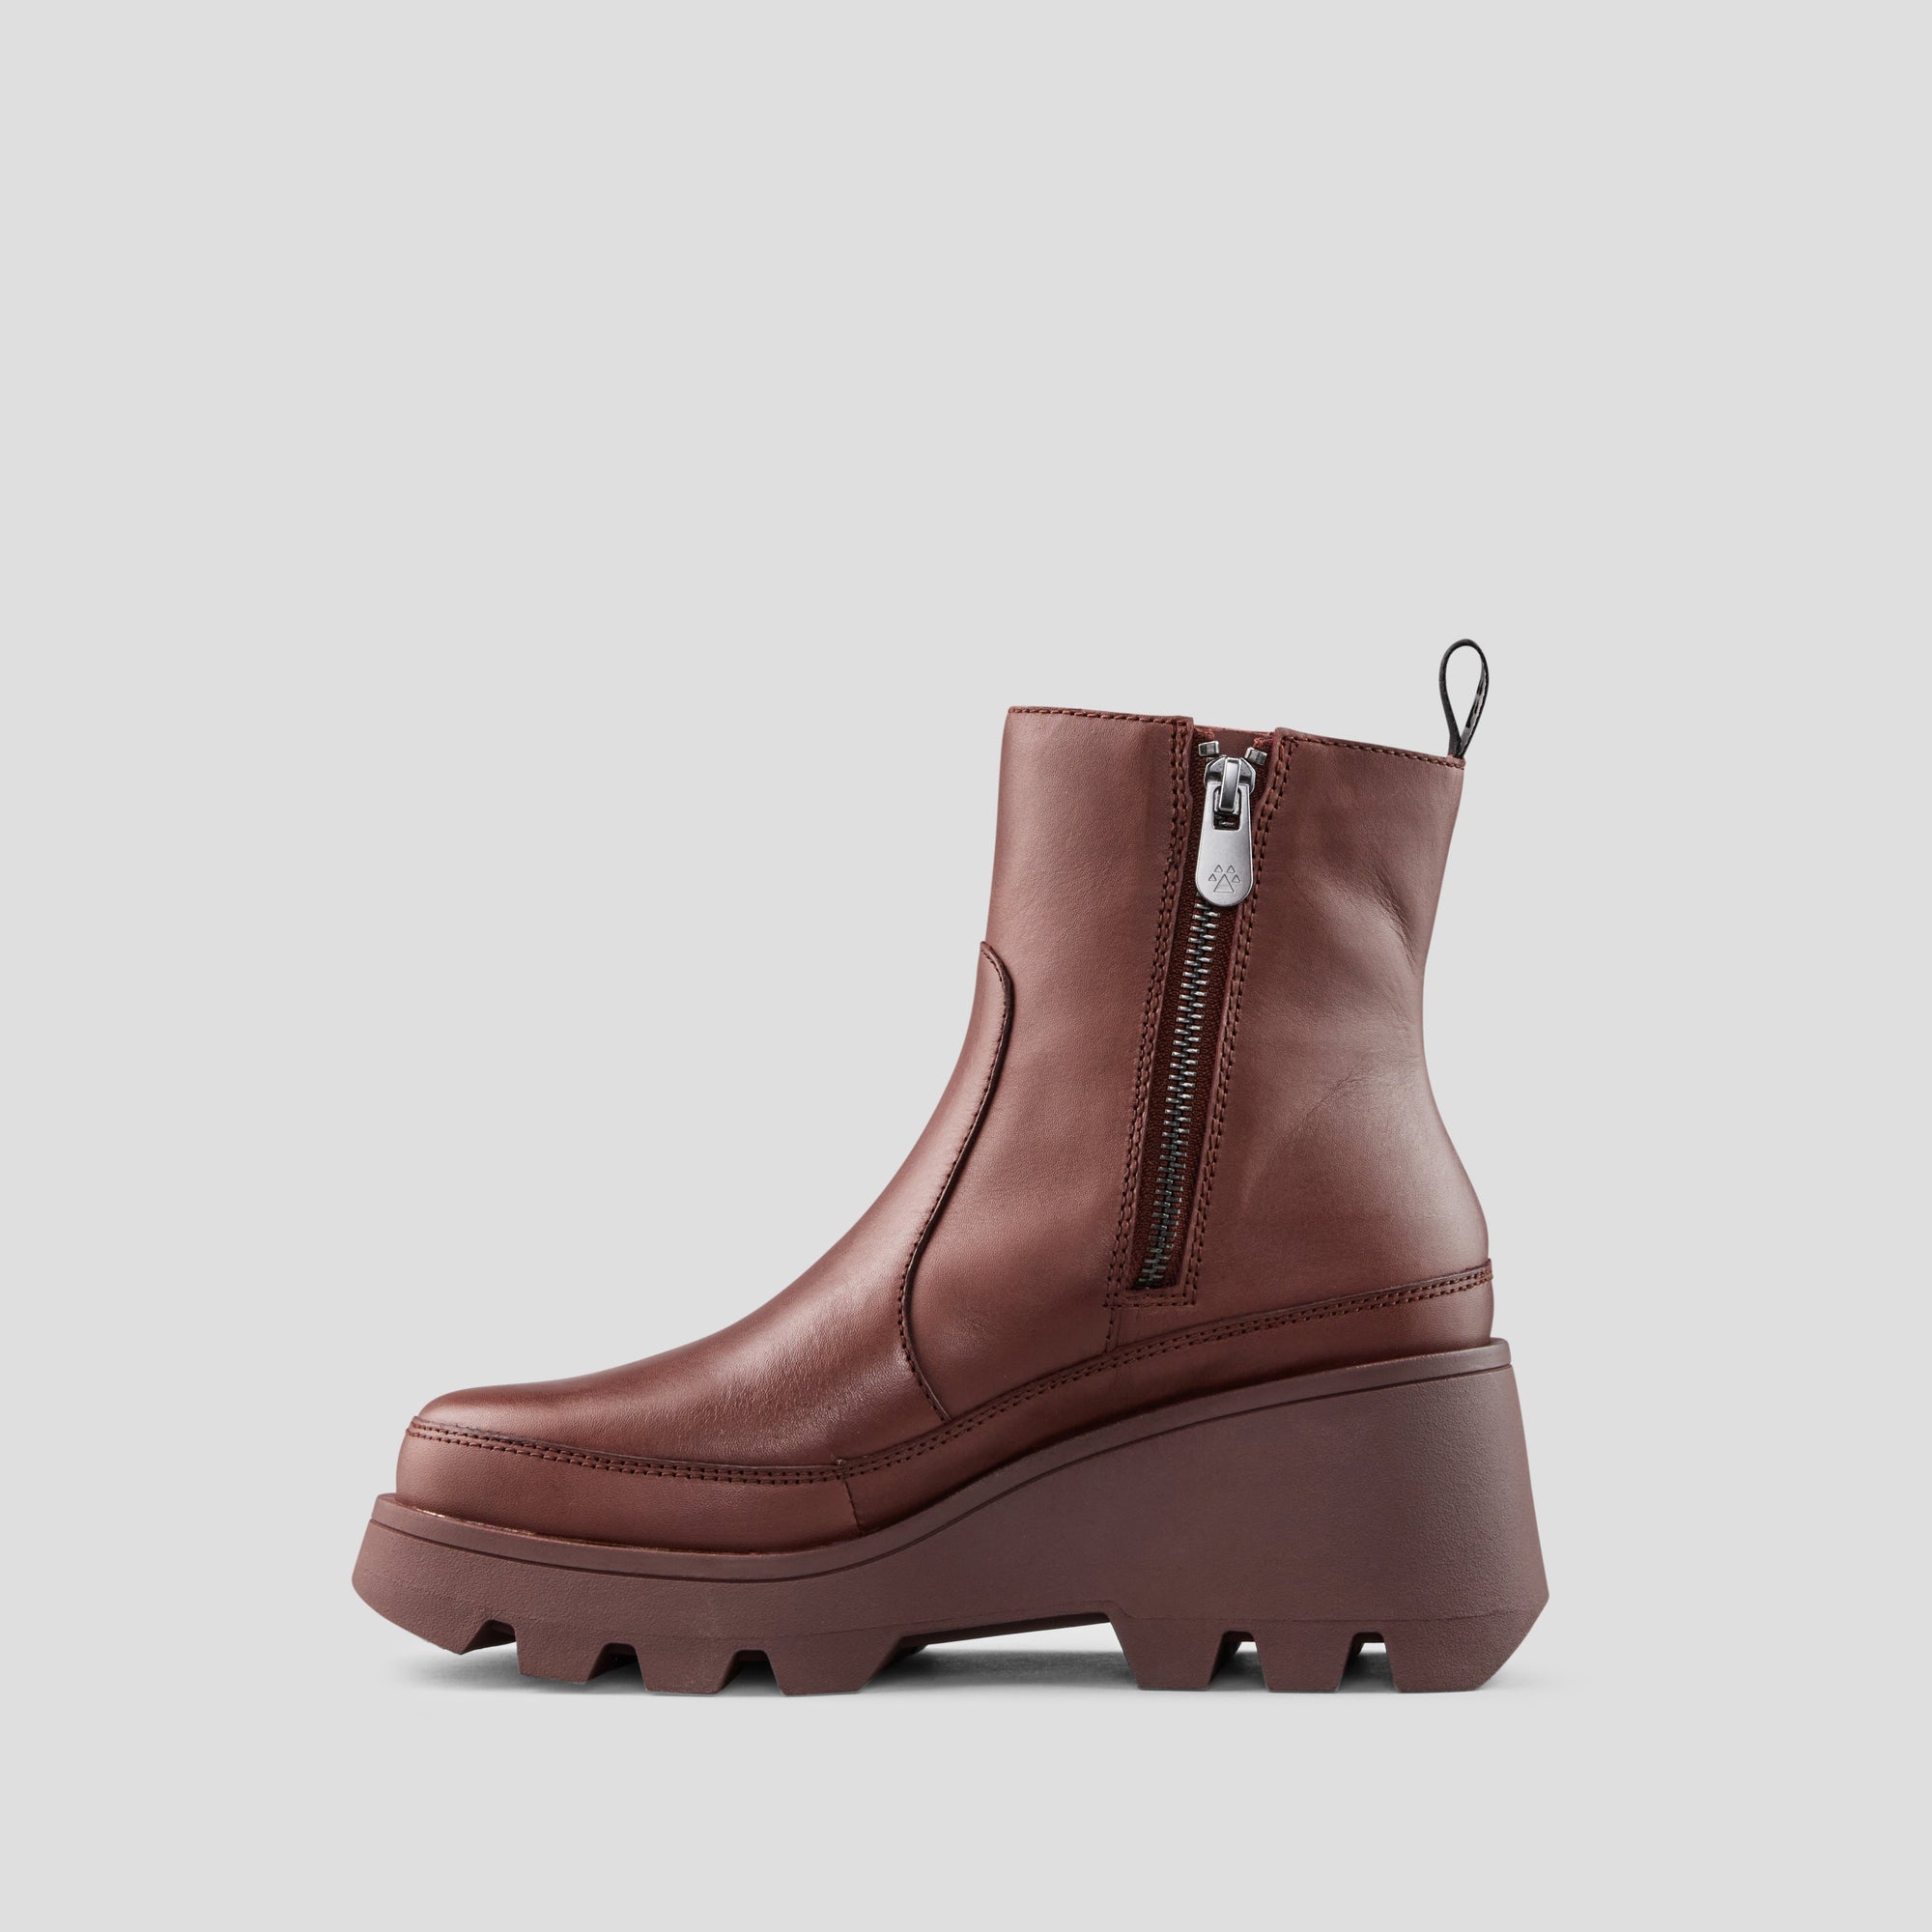 Villa Leather Wedge Waterproof Boot with PrimaLoft® - Colour Chianti